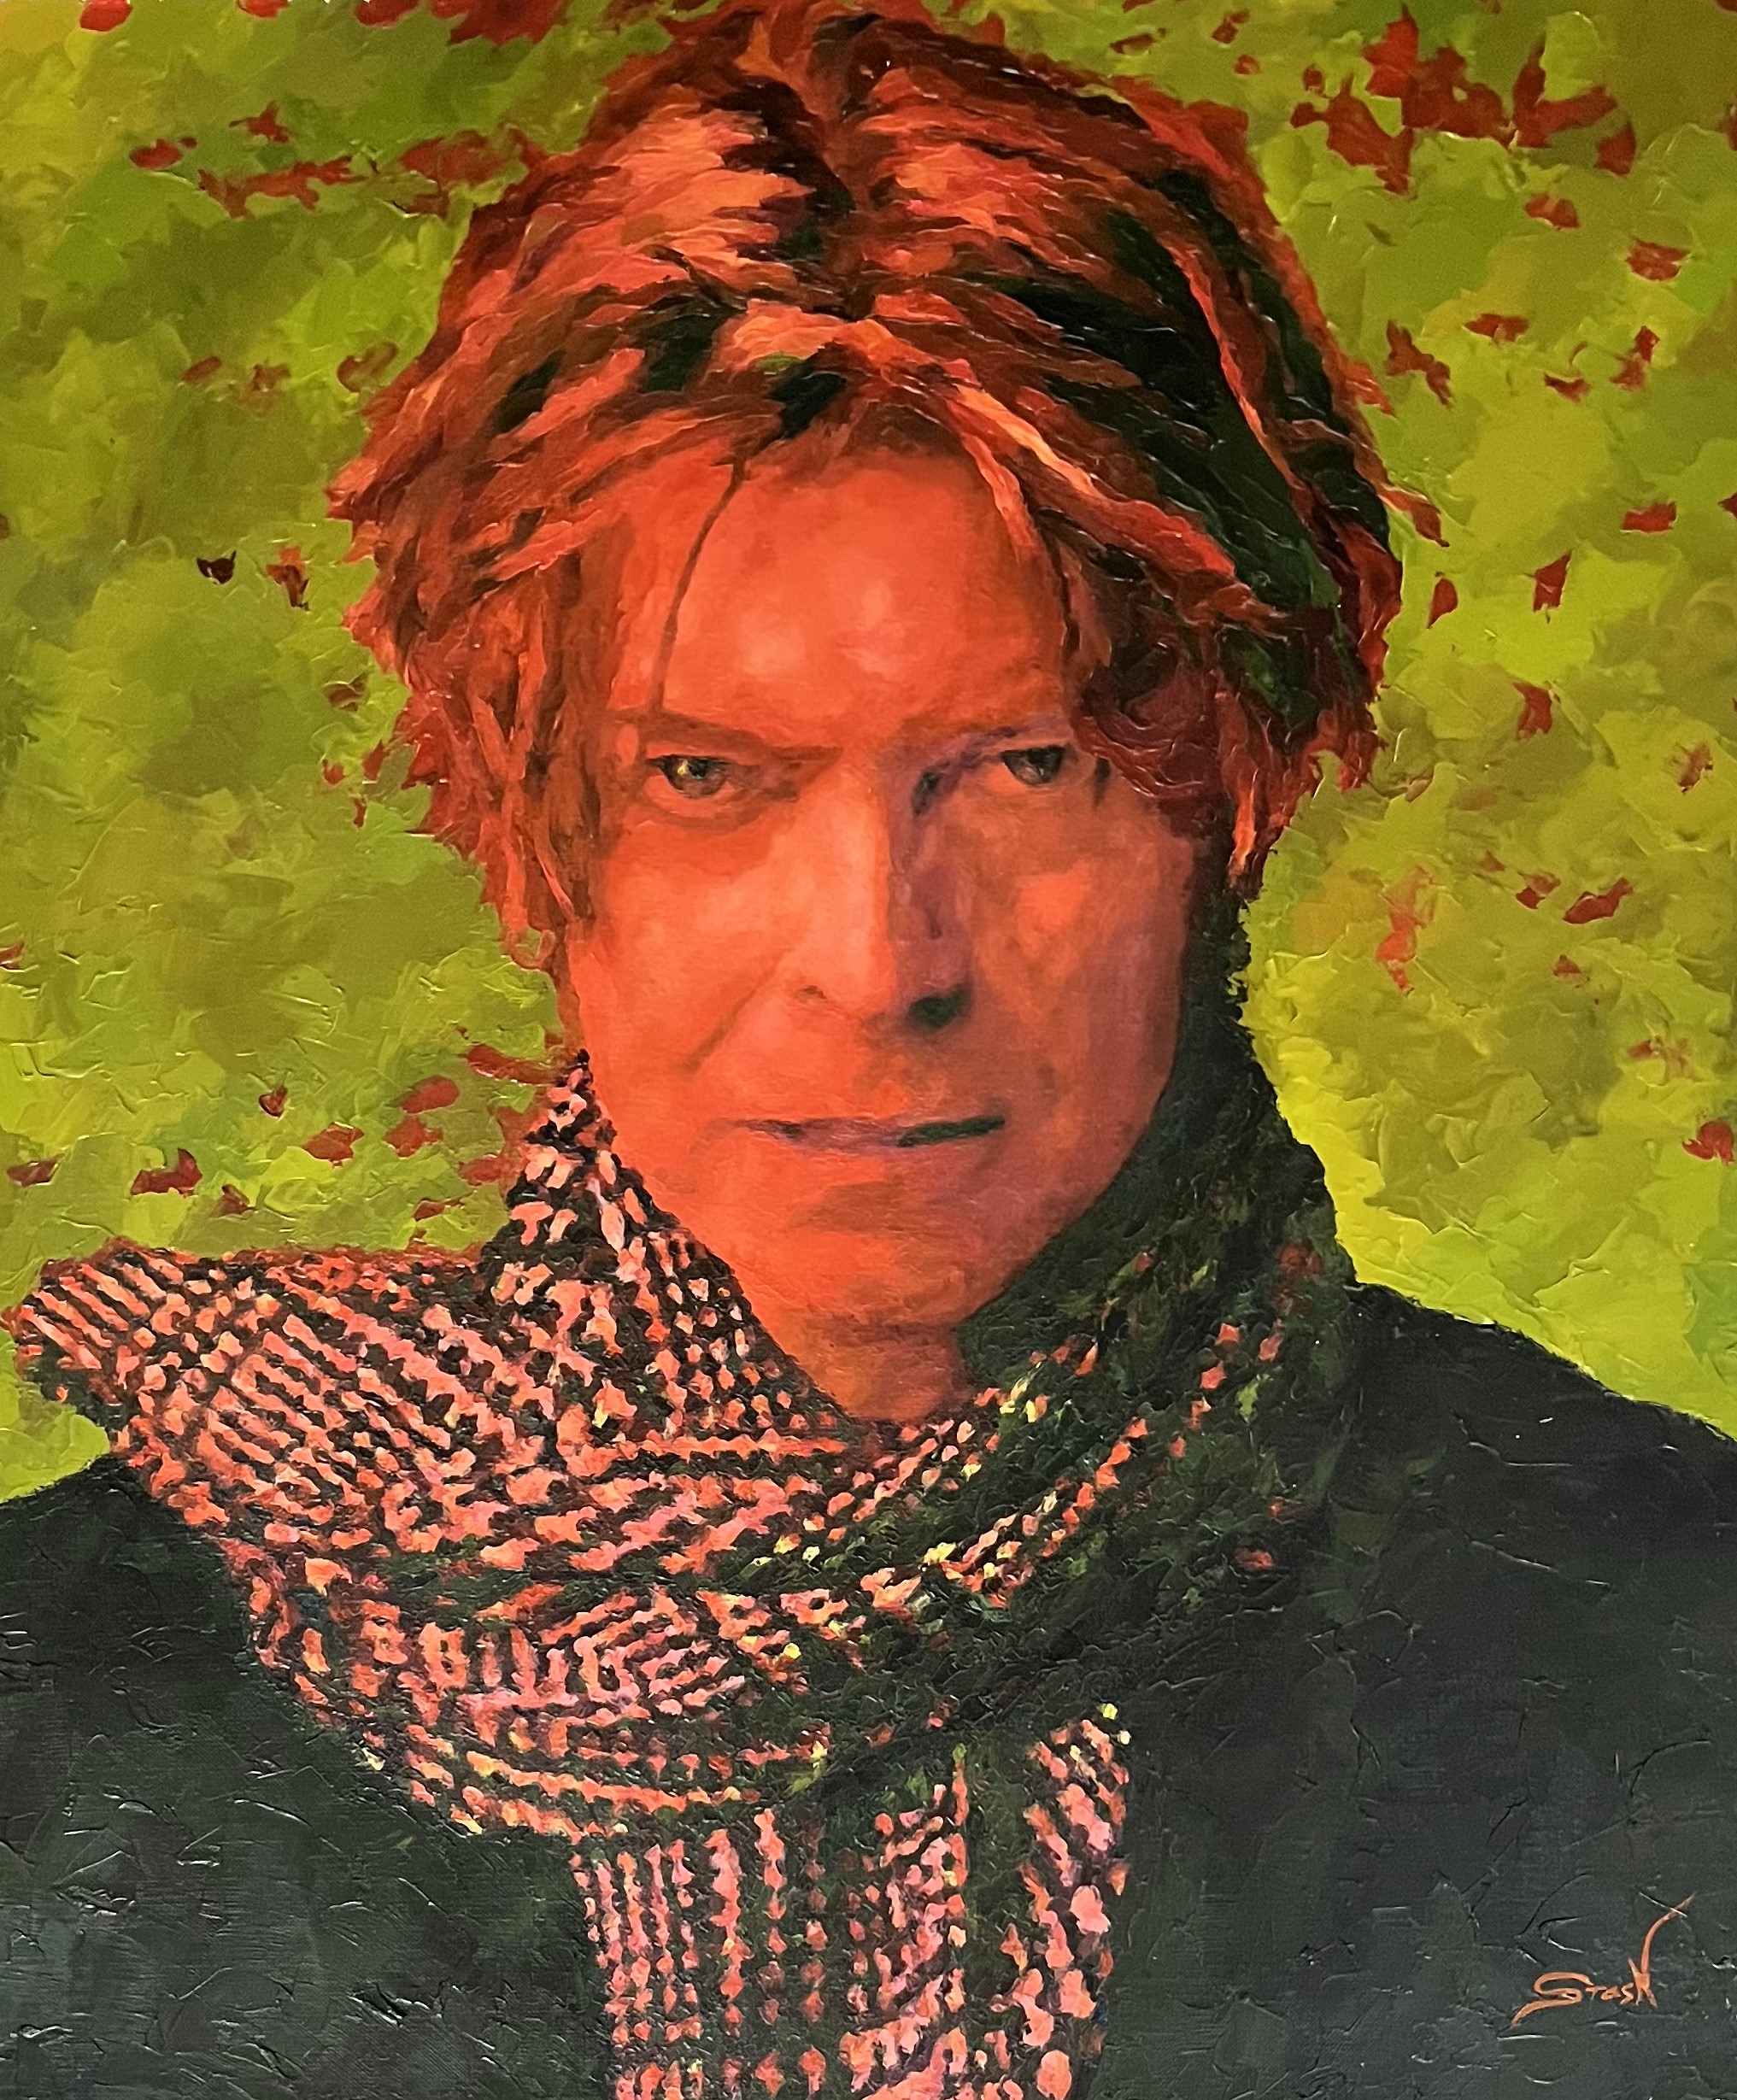 STAS NAMIN - David Bowie - Oil on Canvas - 30x25 inches